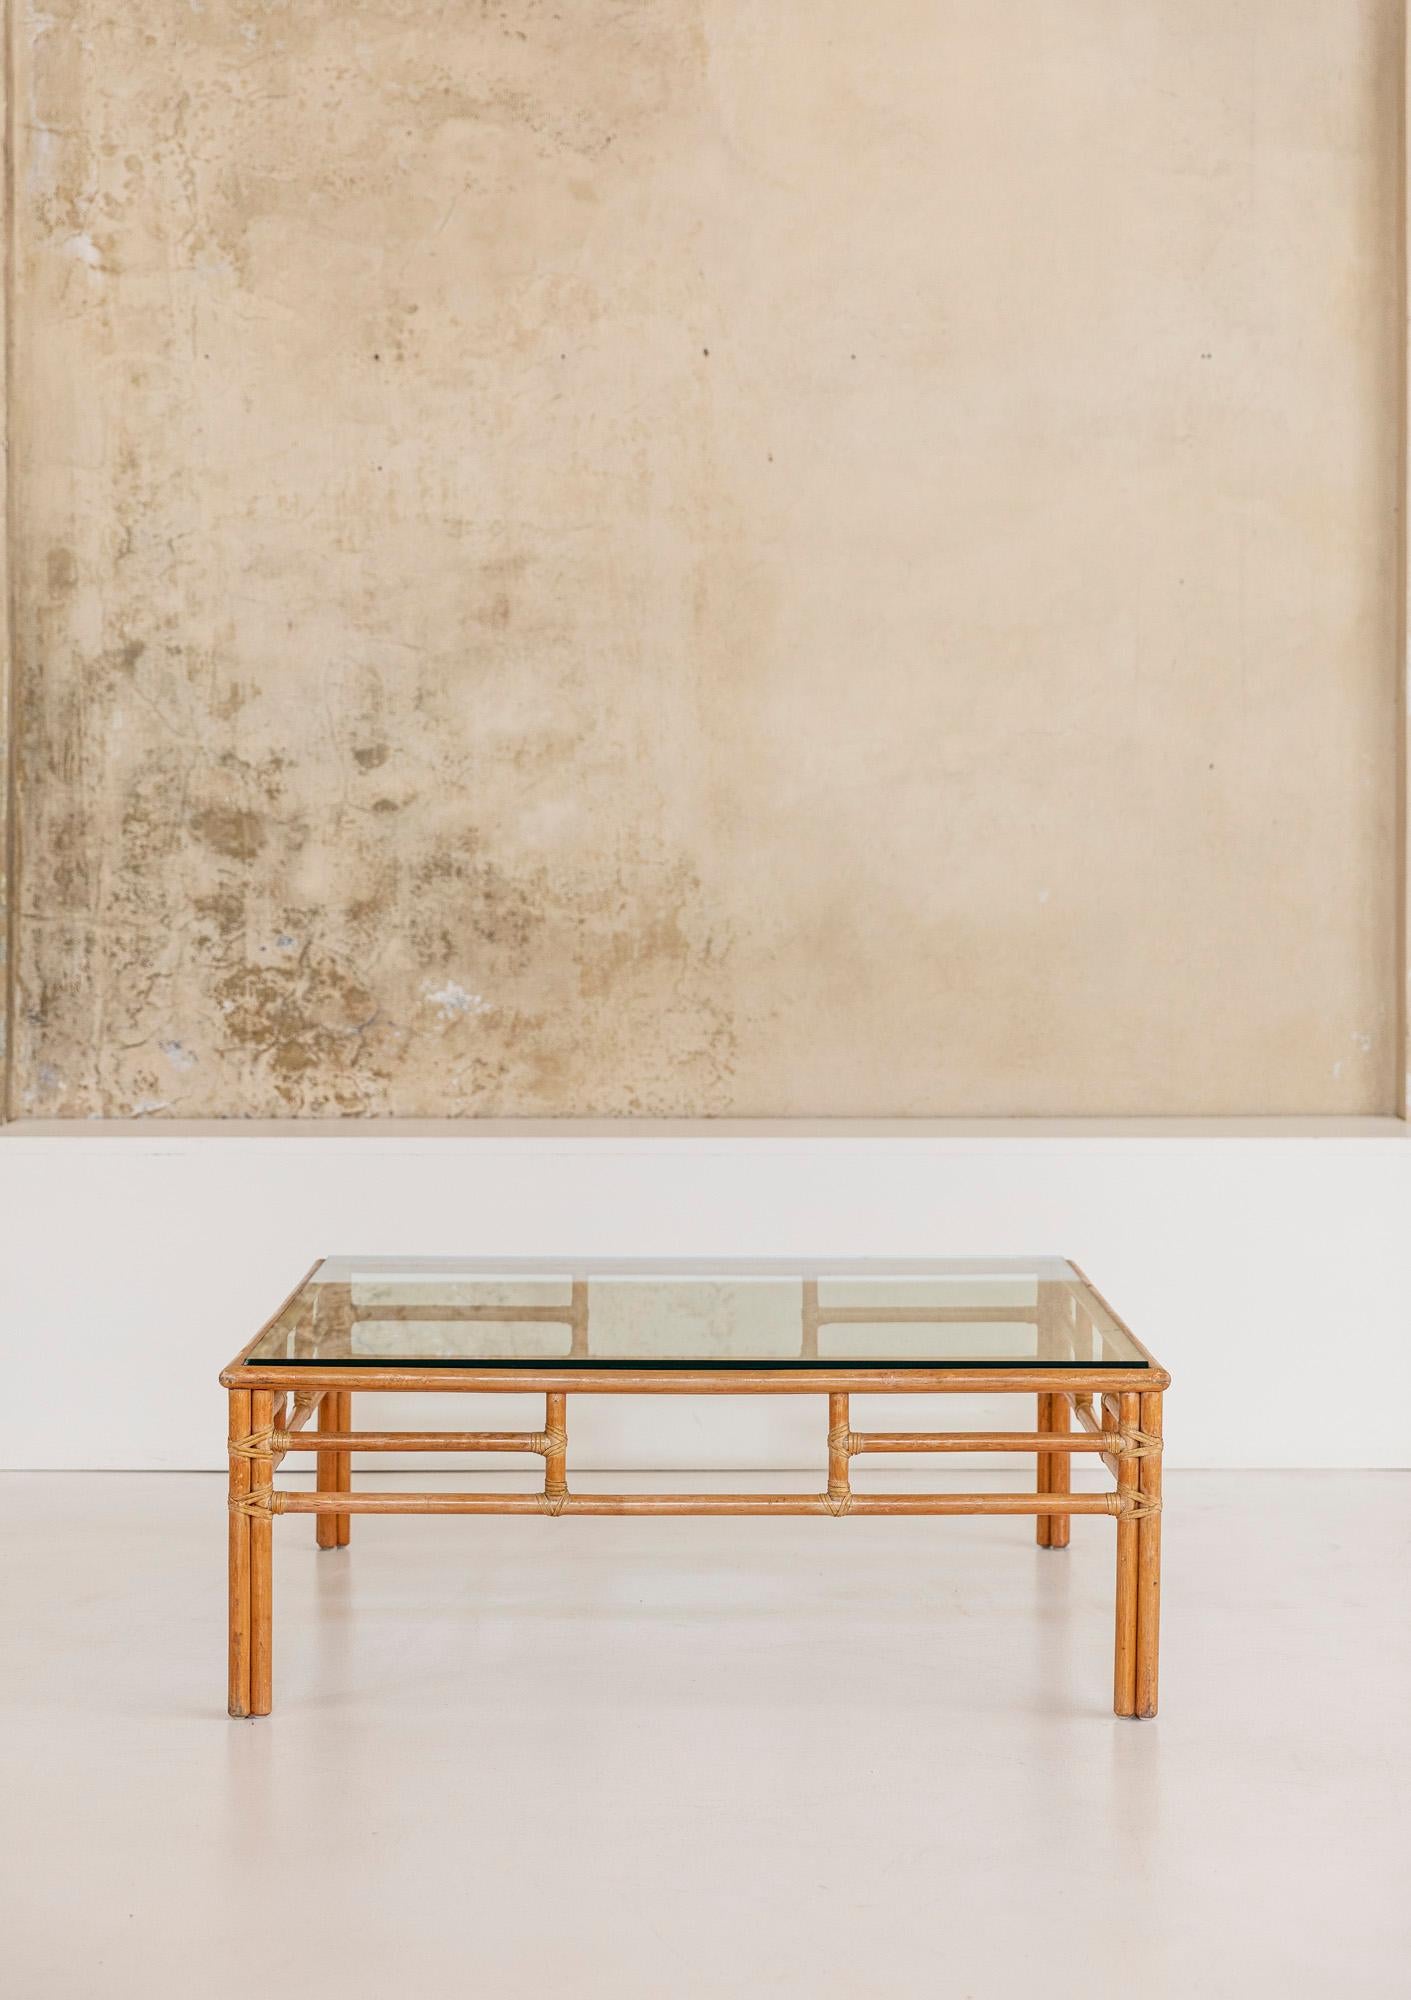 Stunning large coffee table made of bamboo with original glass top, this beautiful piece was designed by Lyda Levi in 1970 ca.
This table can be combined with the whole set including two sofas, two armchairs with their pouf, and two smaller tables.